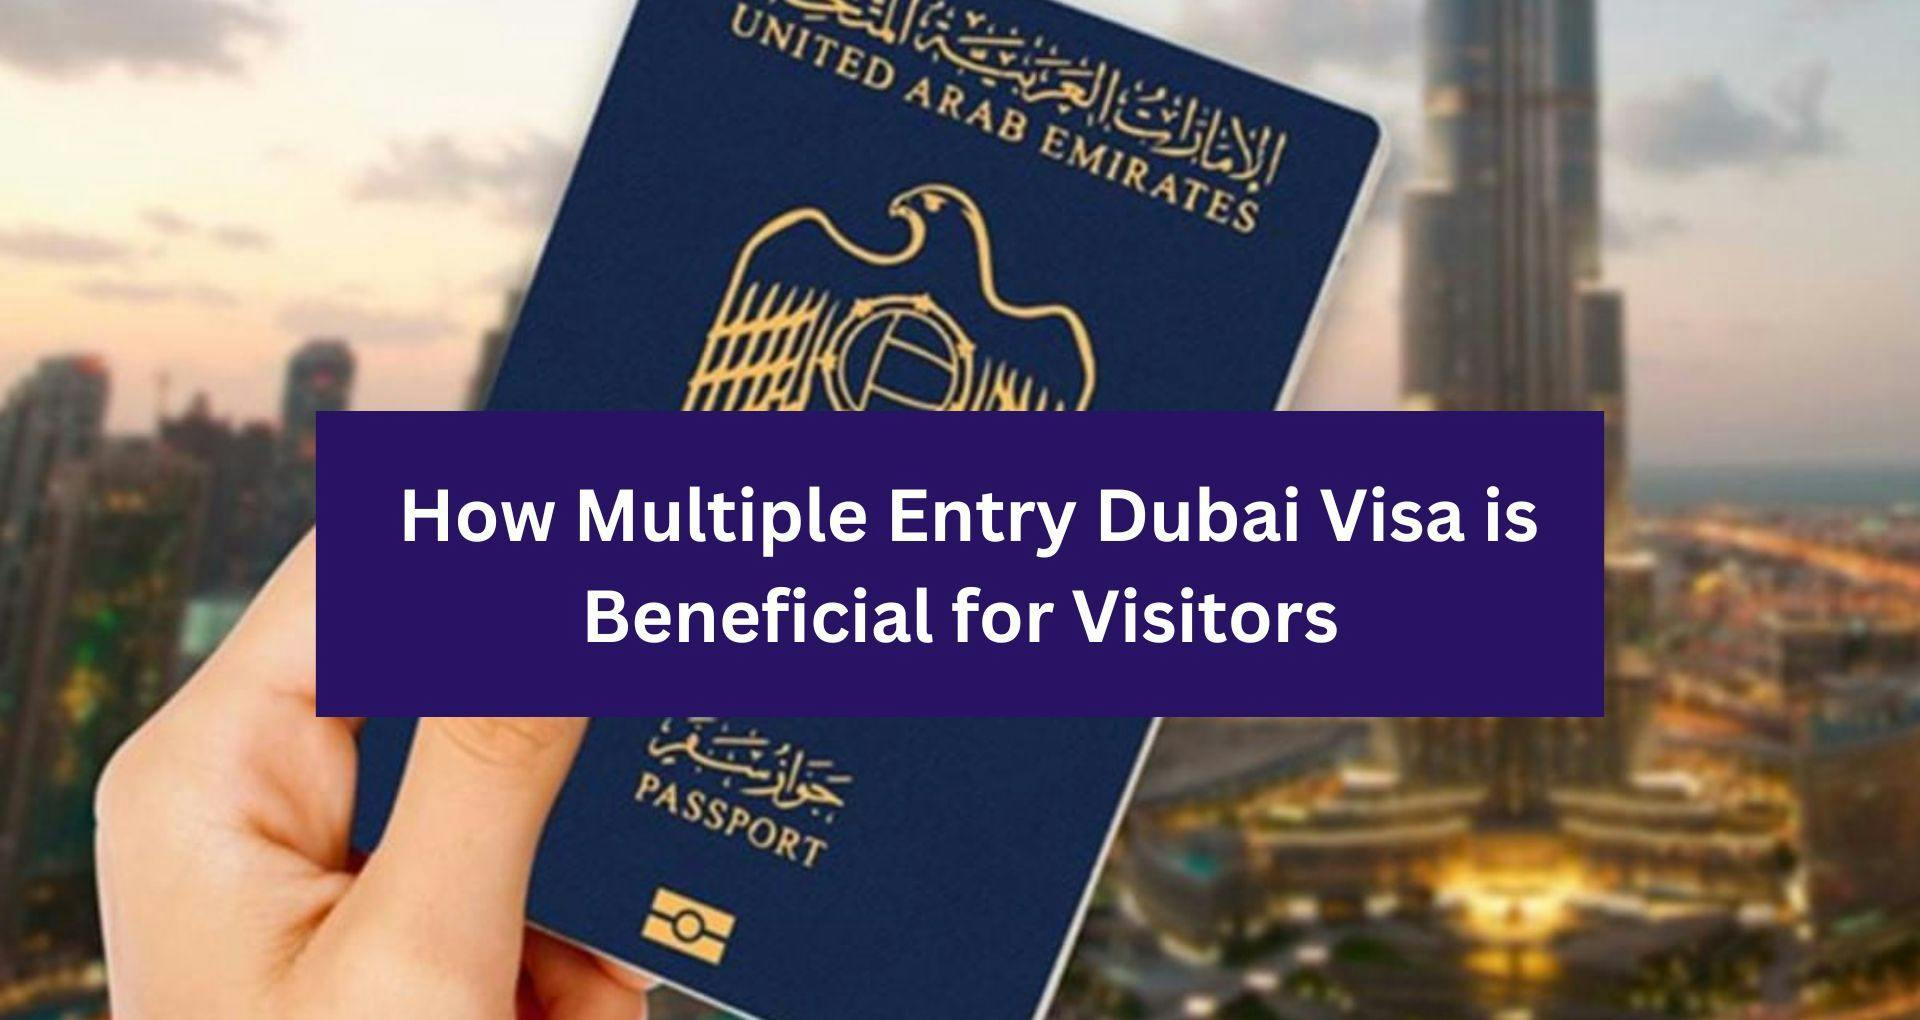 How Multiple Entry Dubai Visa is Beneficial for Visitors